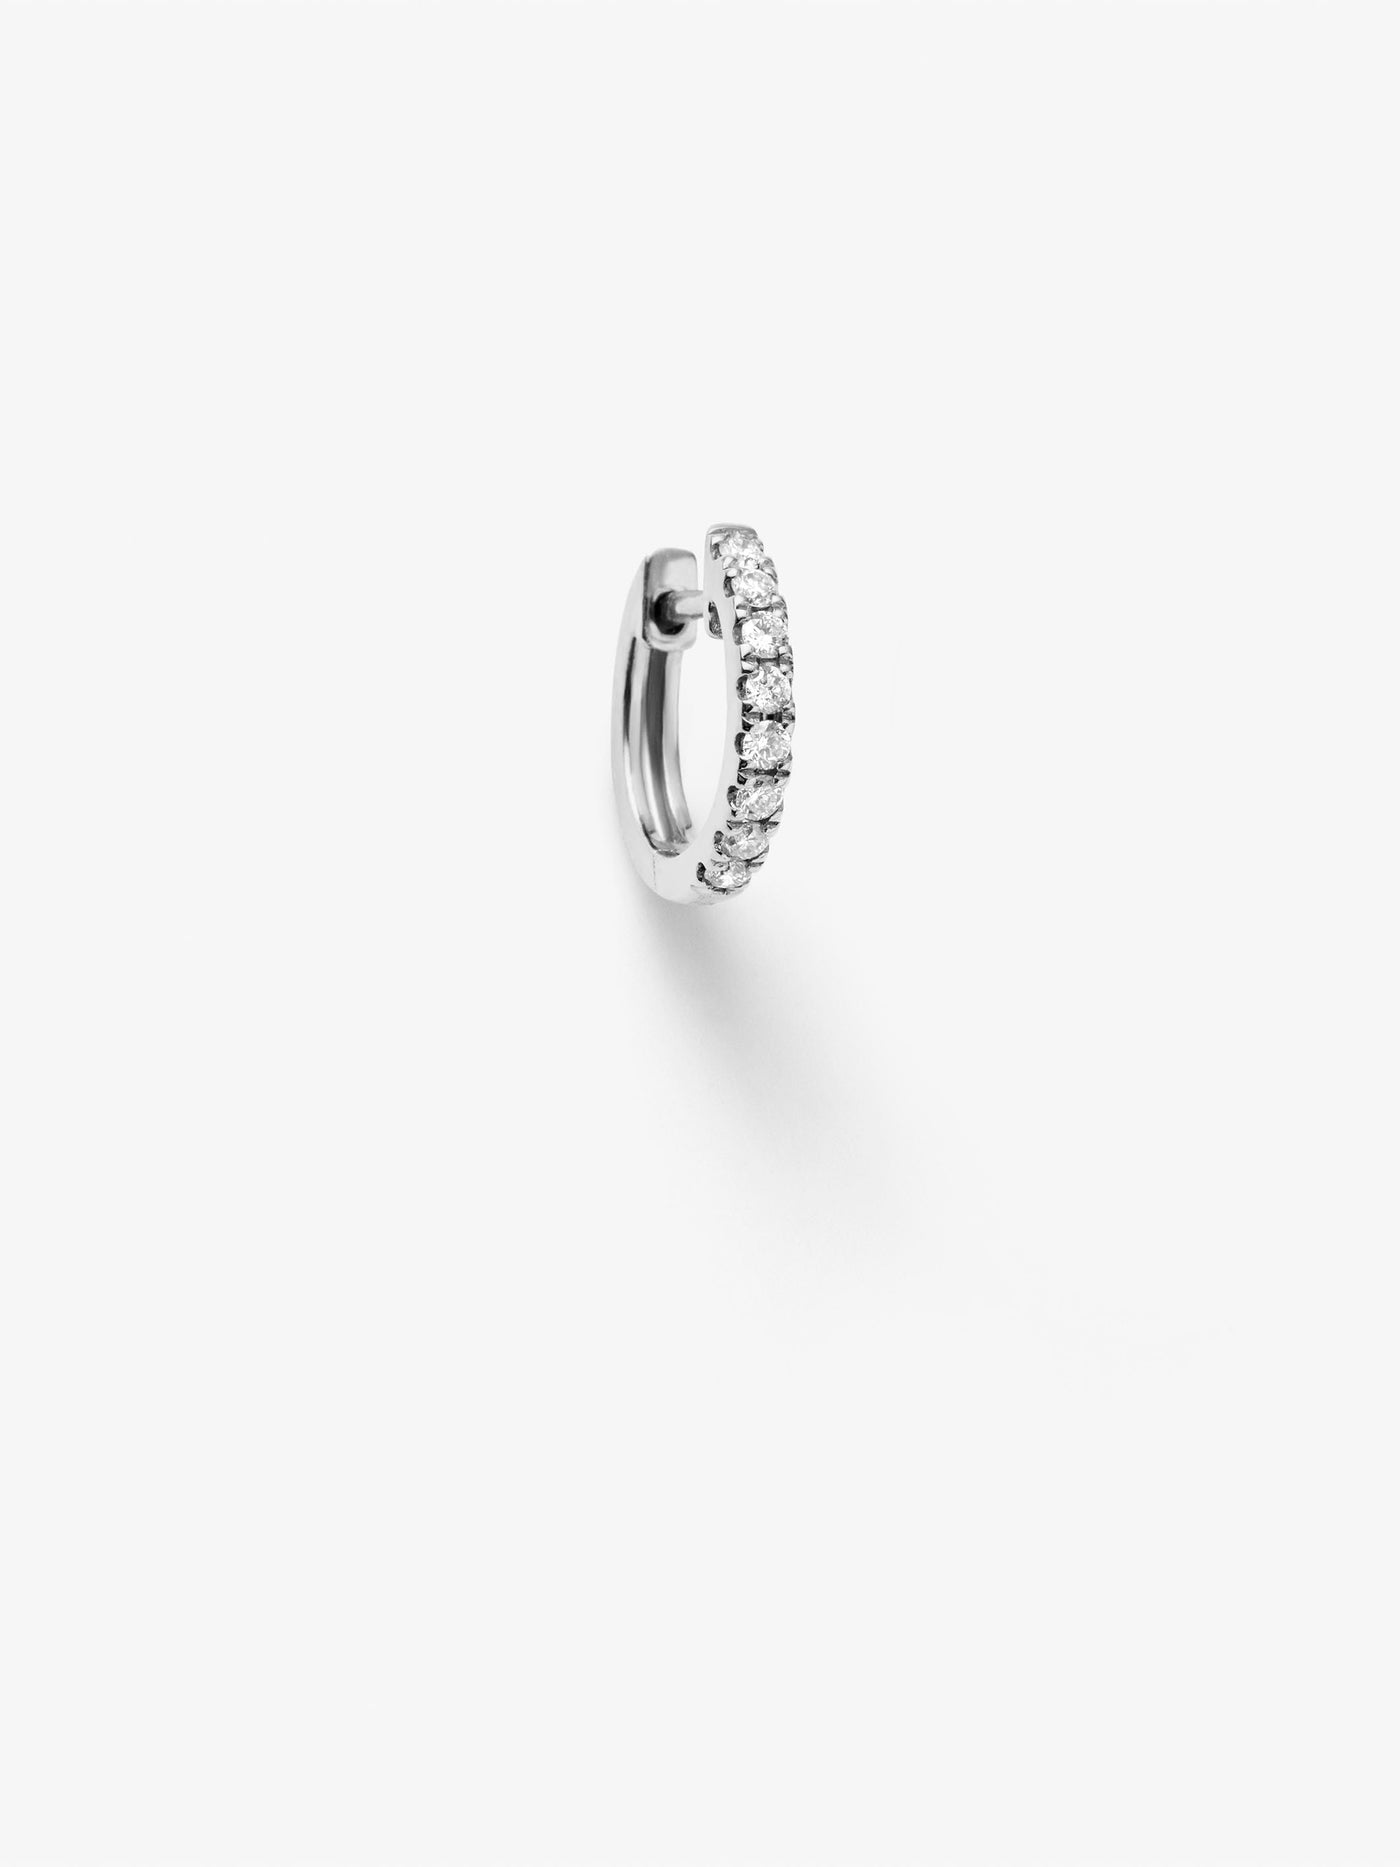 Huggie diamond earrings in 18k solid white gold, are hinged for easy on and off